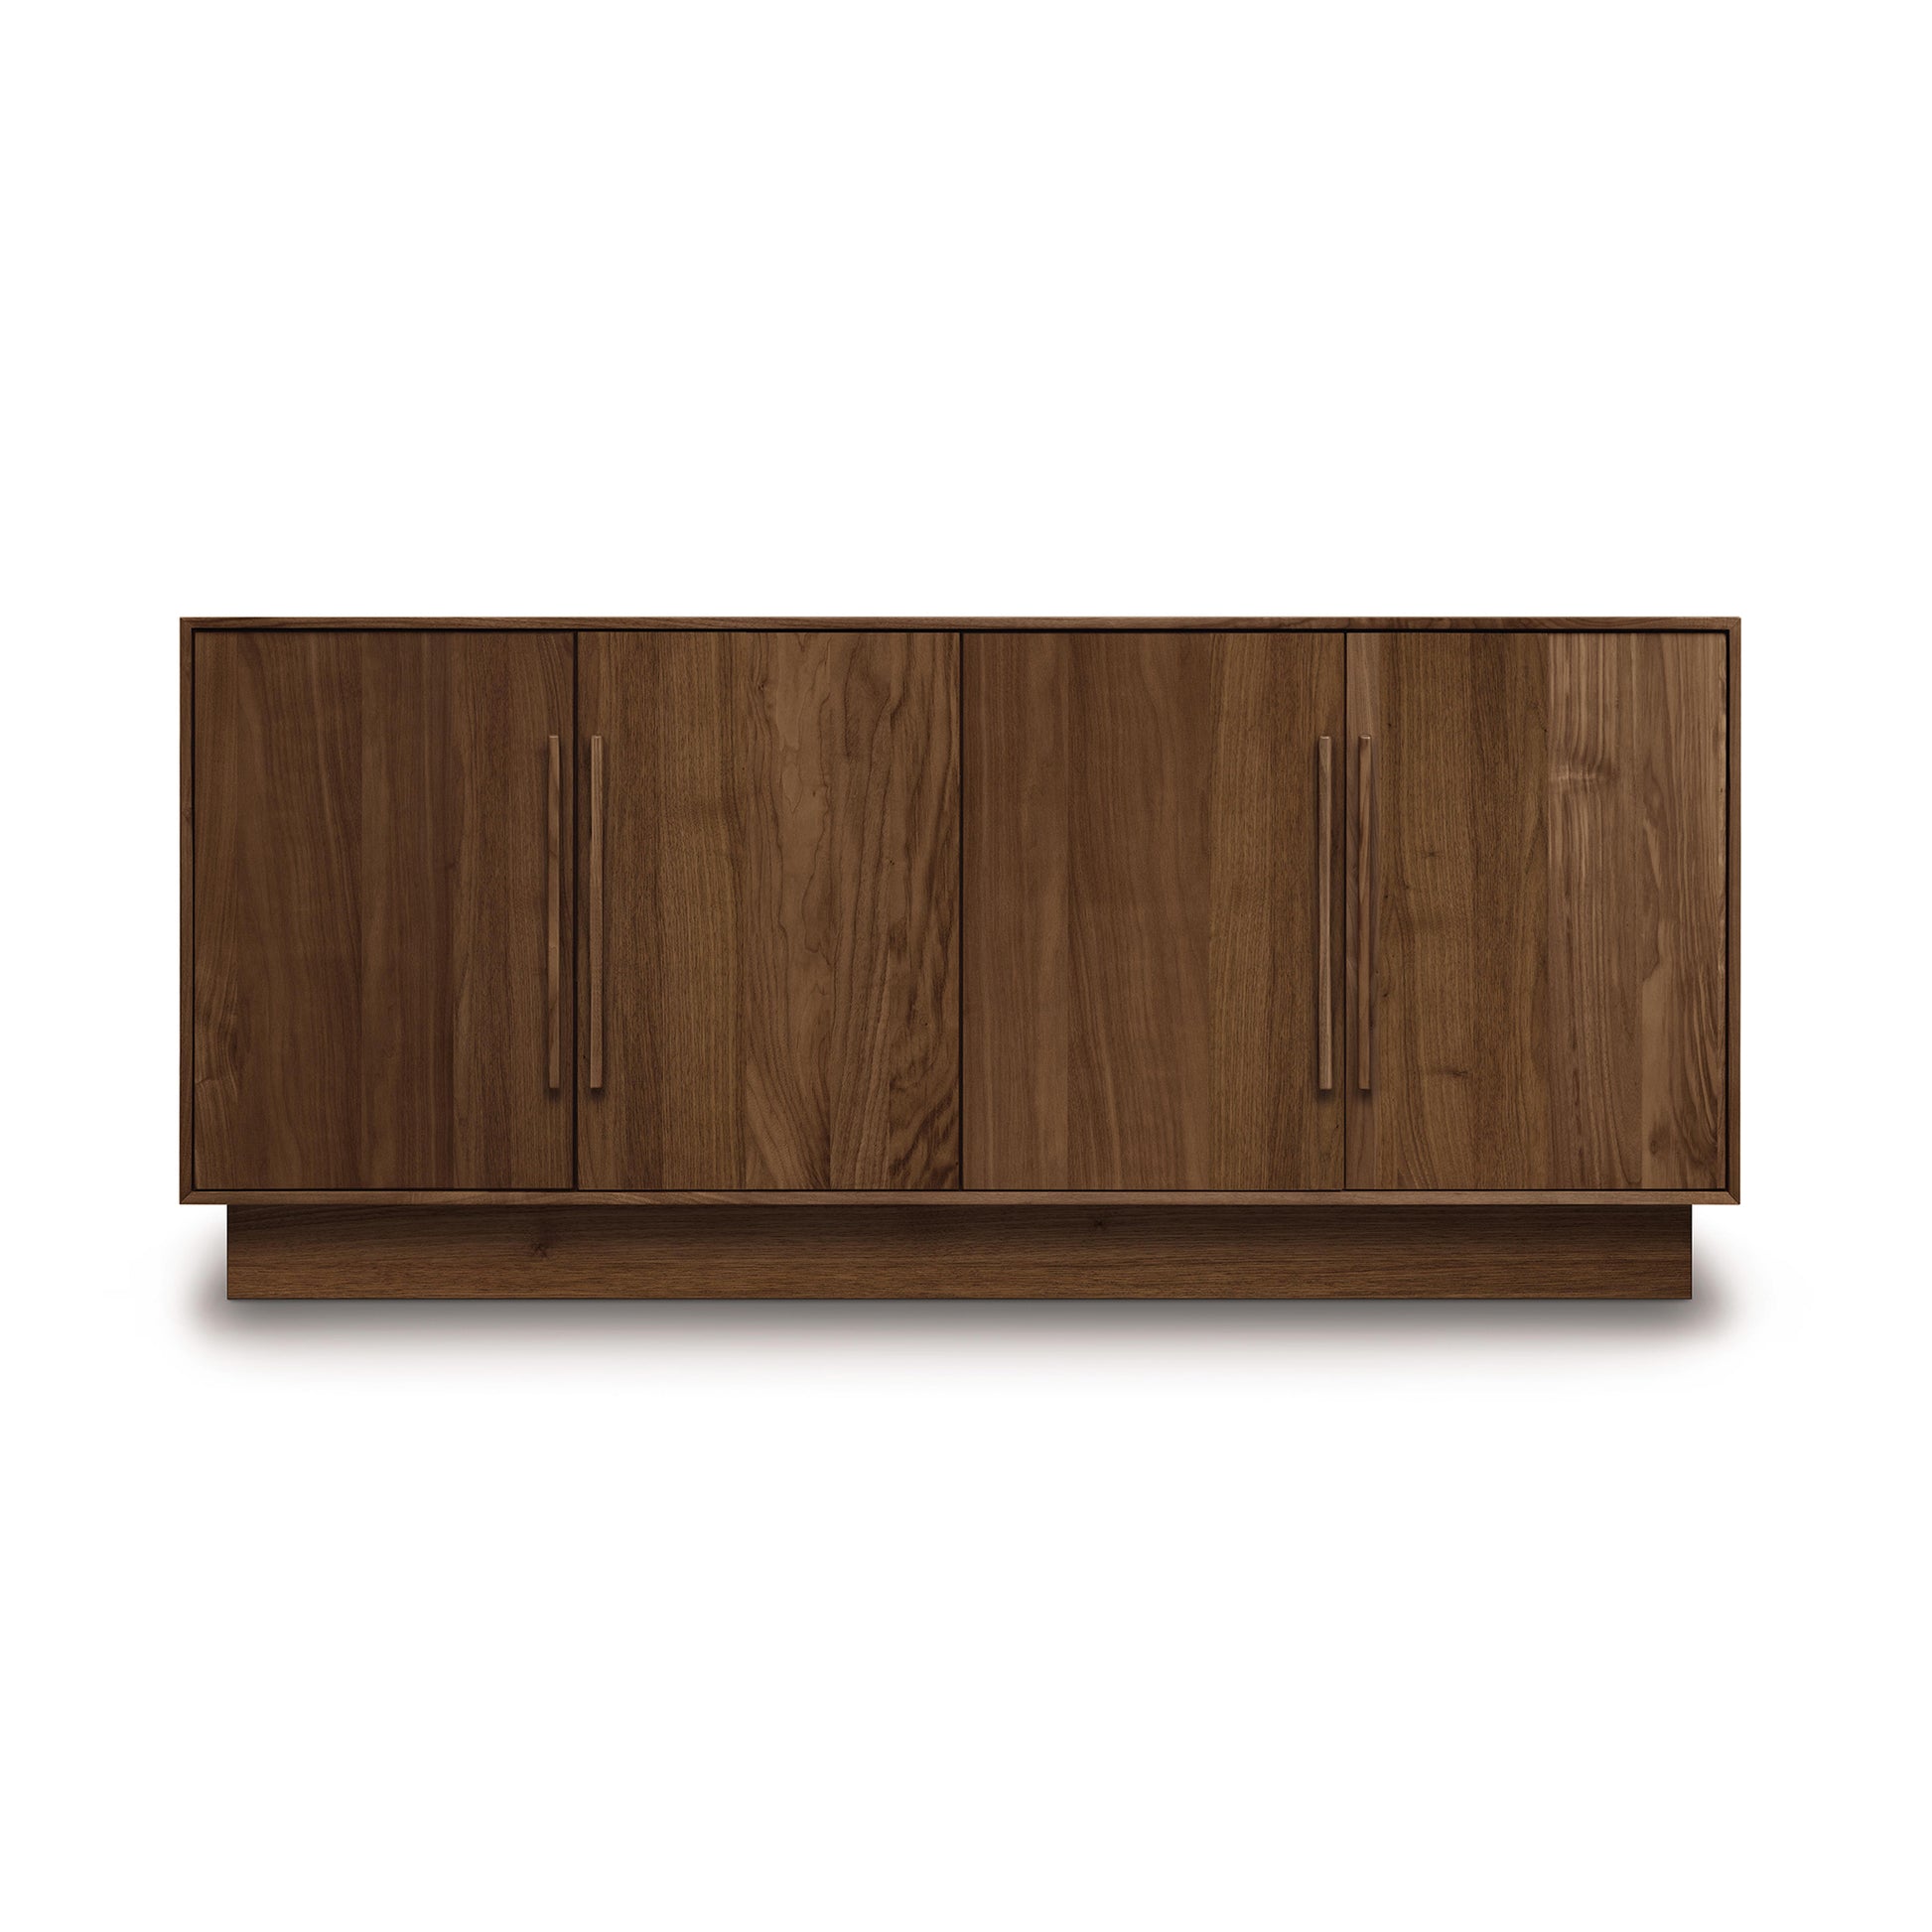 A Moduluxe 4-Door Dresser - 29" Series by Copeland Furniture with horizontal handles against a white background.